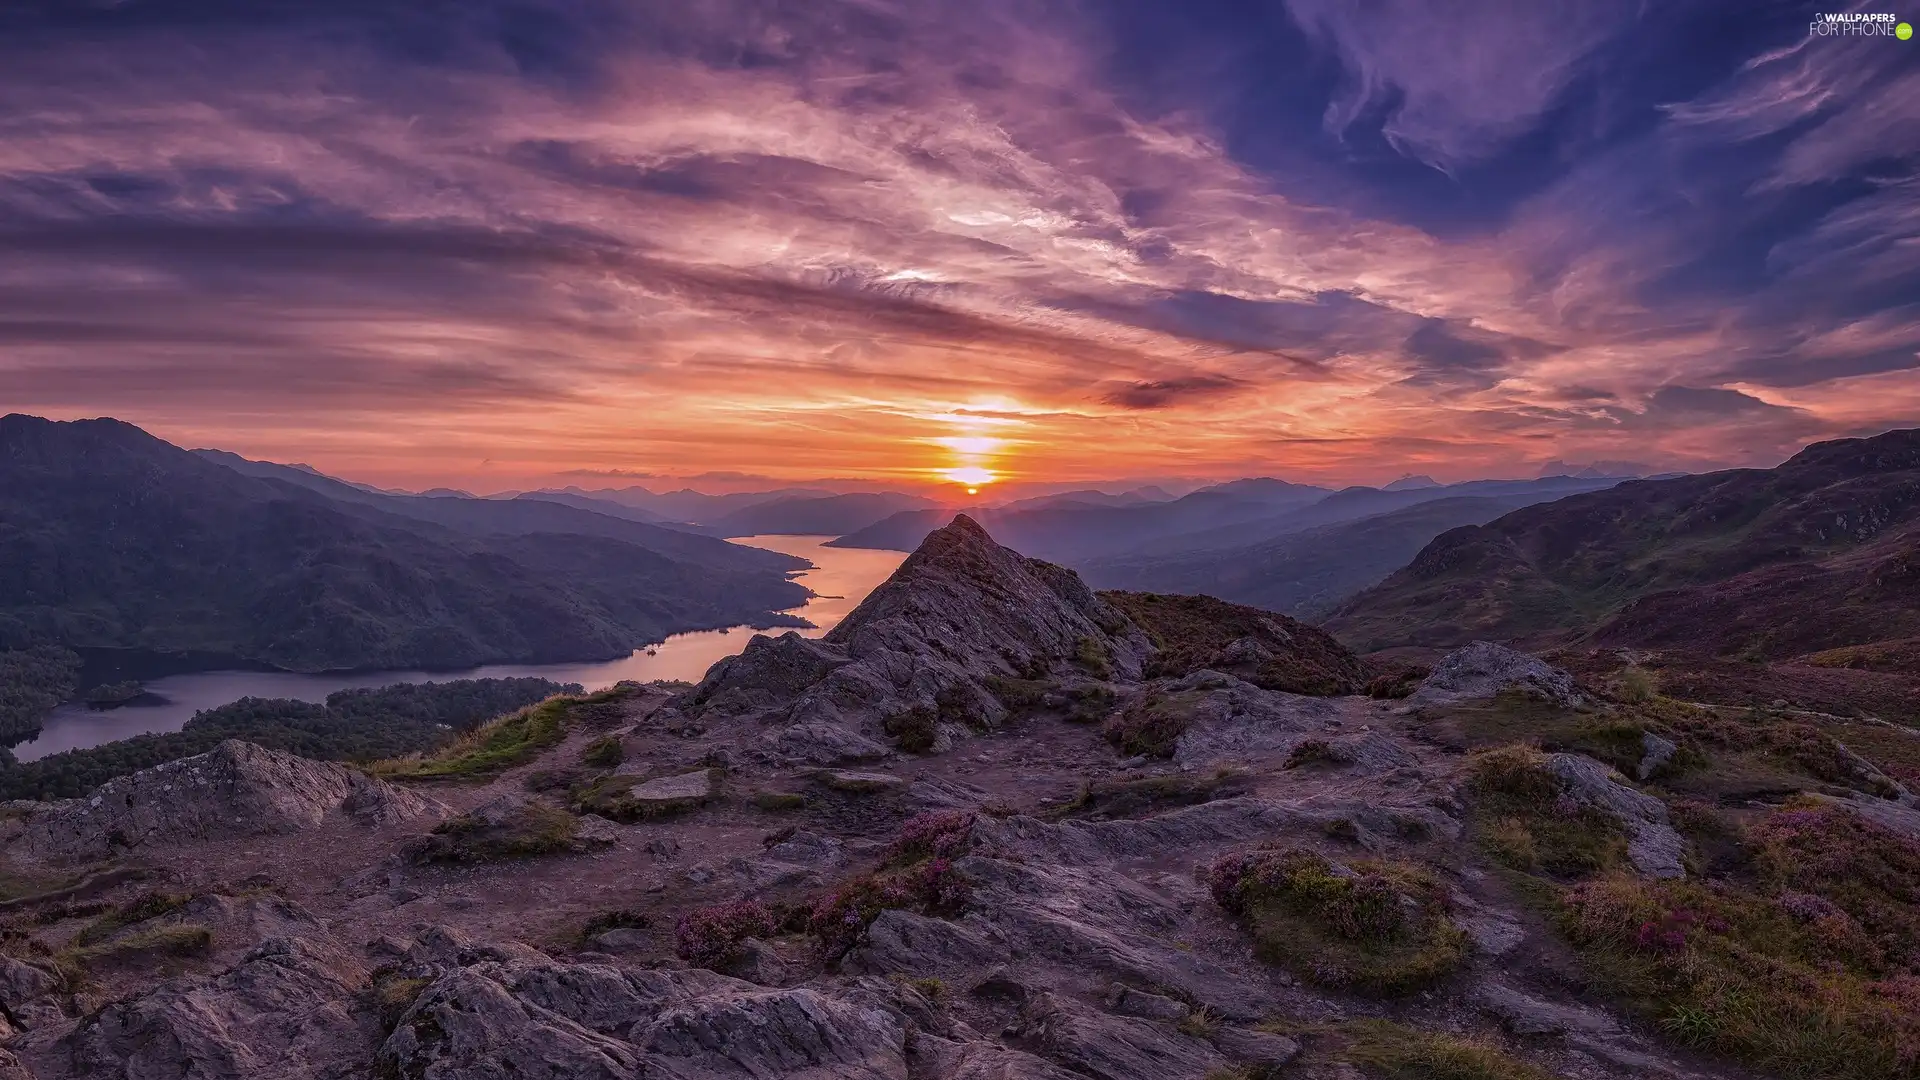 Stirling County, Ben Aan Hill, Great Sunsets, Loch Katrine Lake, Loch Lomond and the Trossachs National Park, Scotland, Mountains